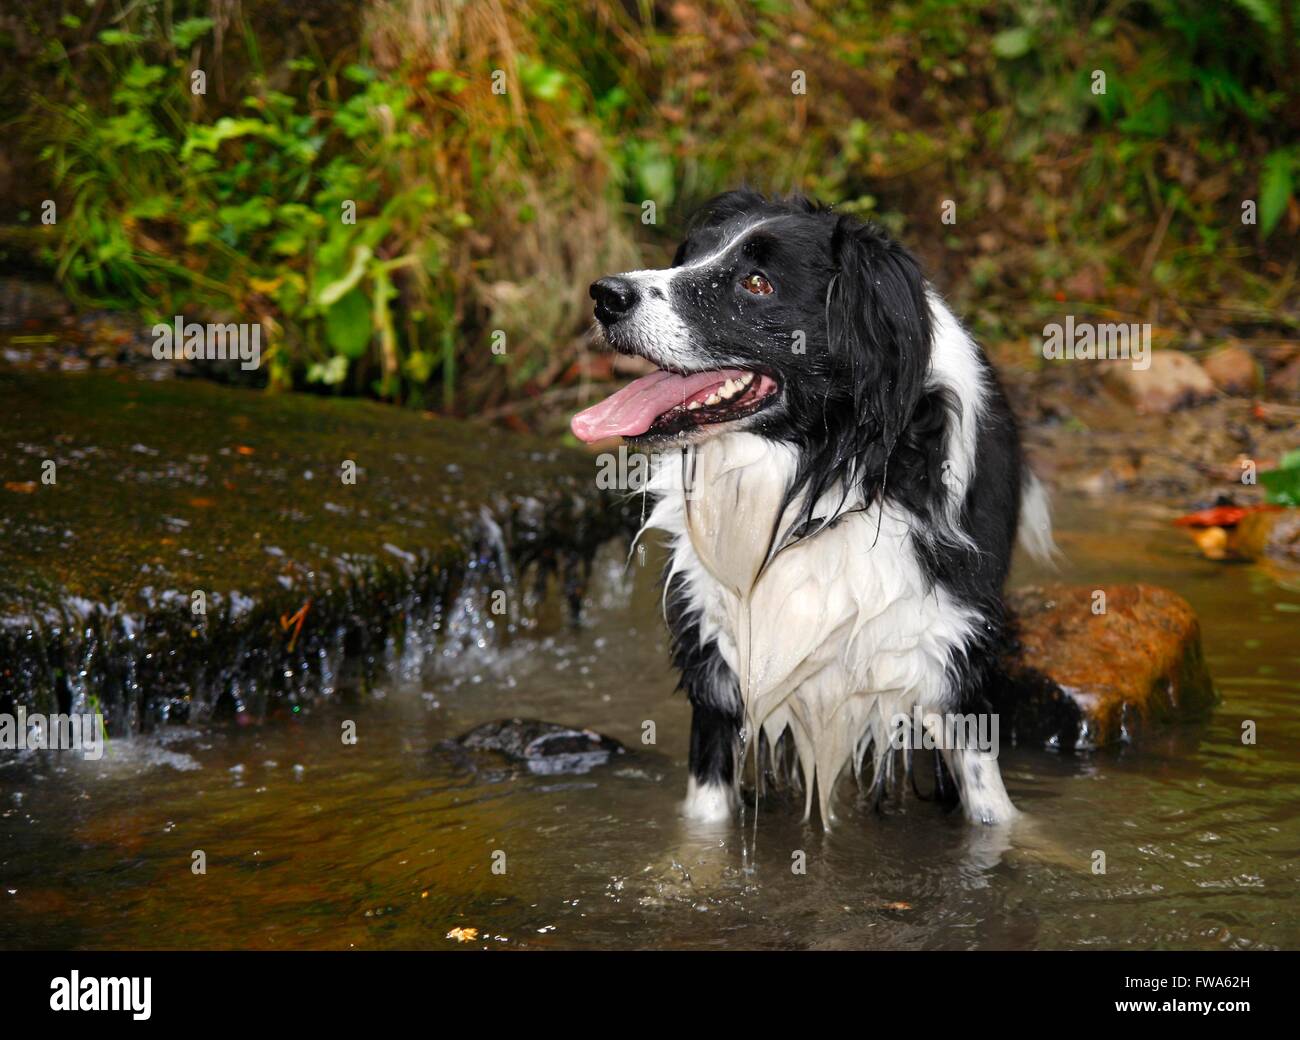 Cross Border Collie dog standing in a river Banque D'Images